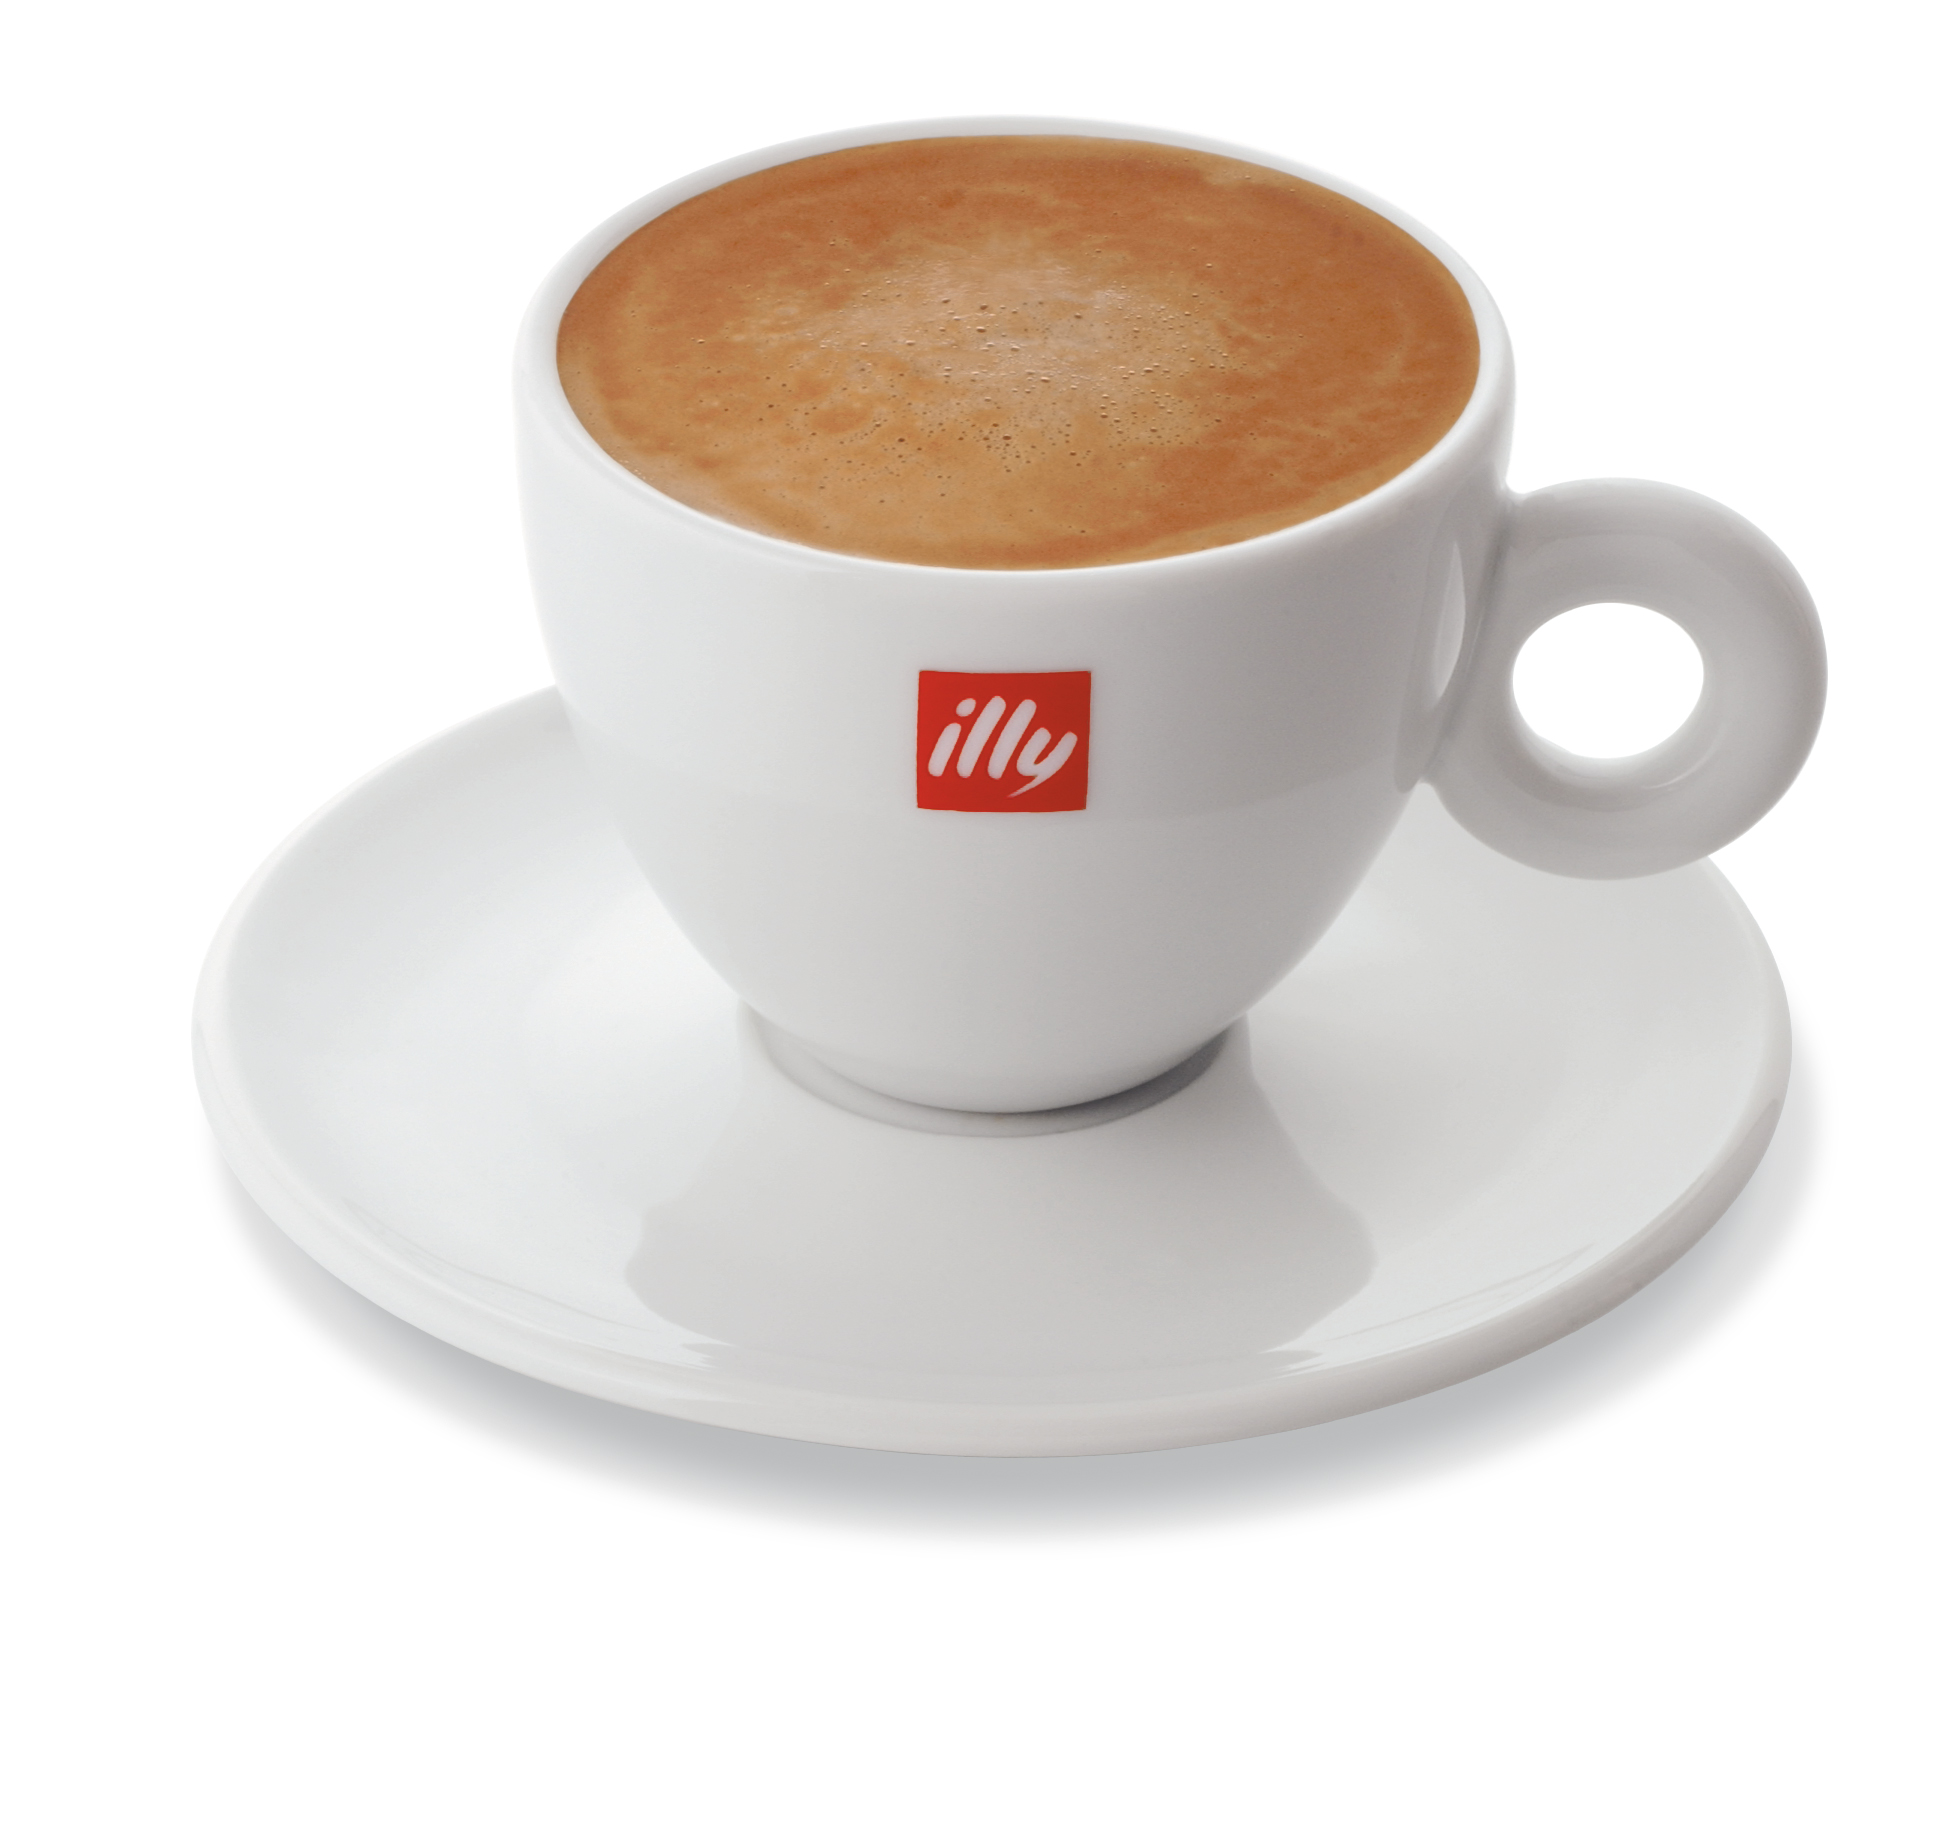 Illy Latte Coffee